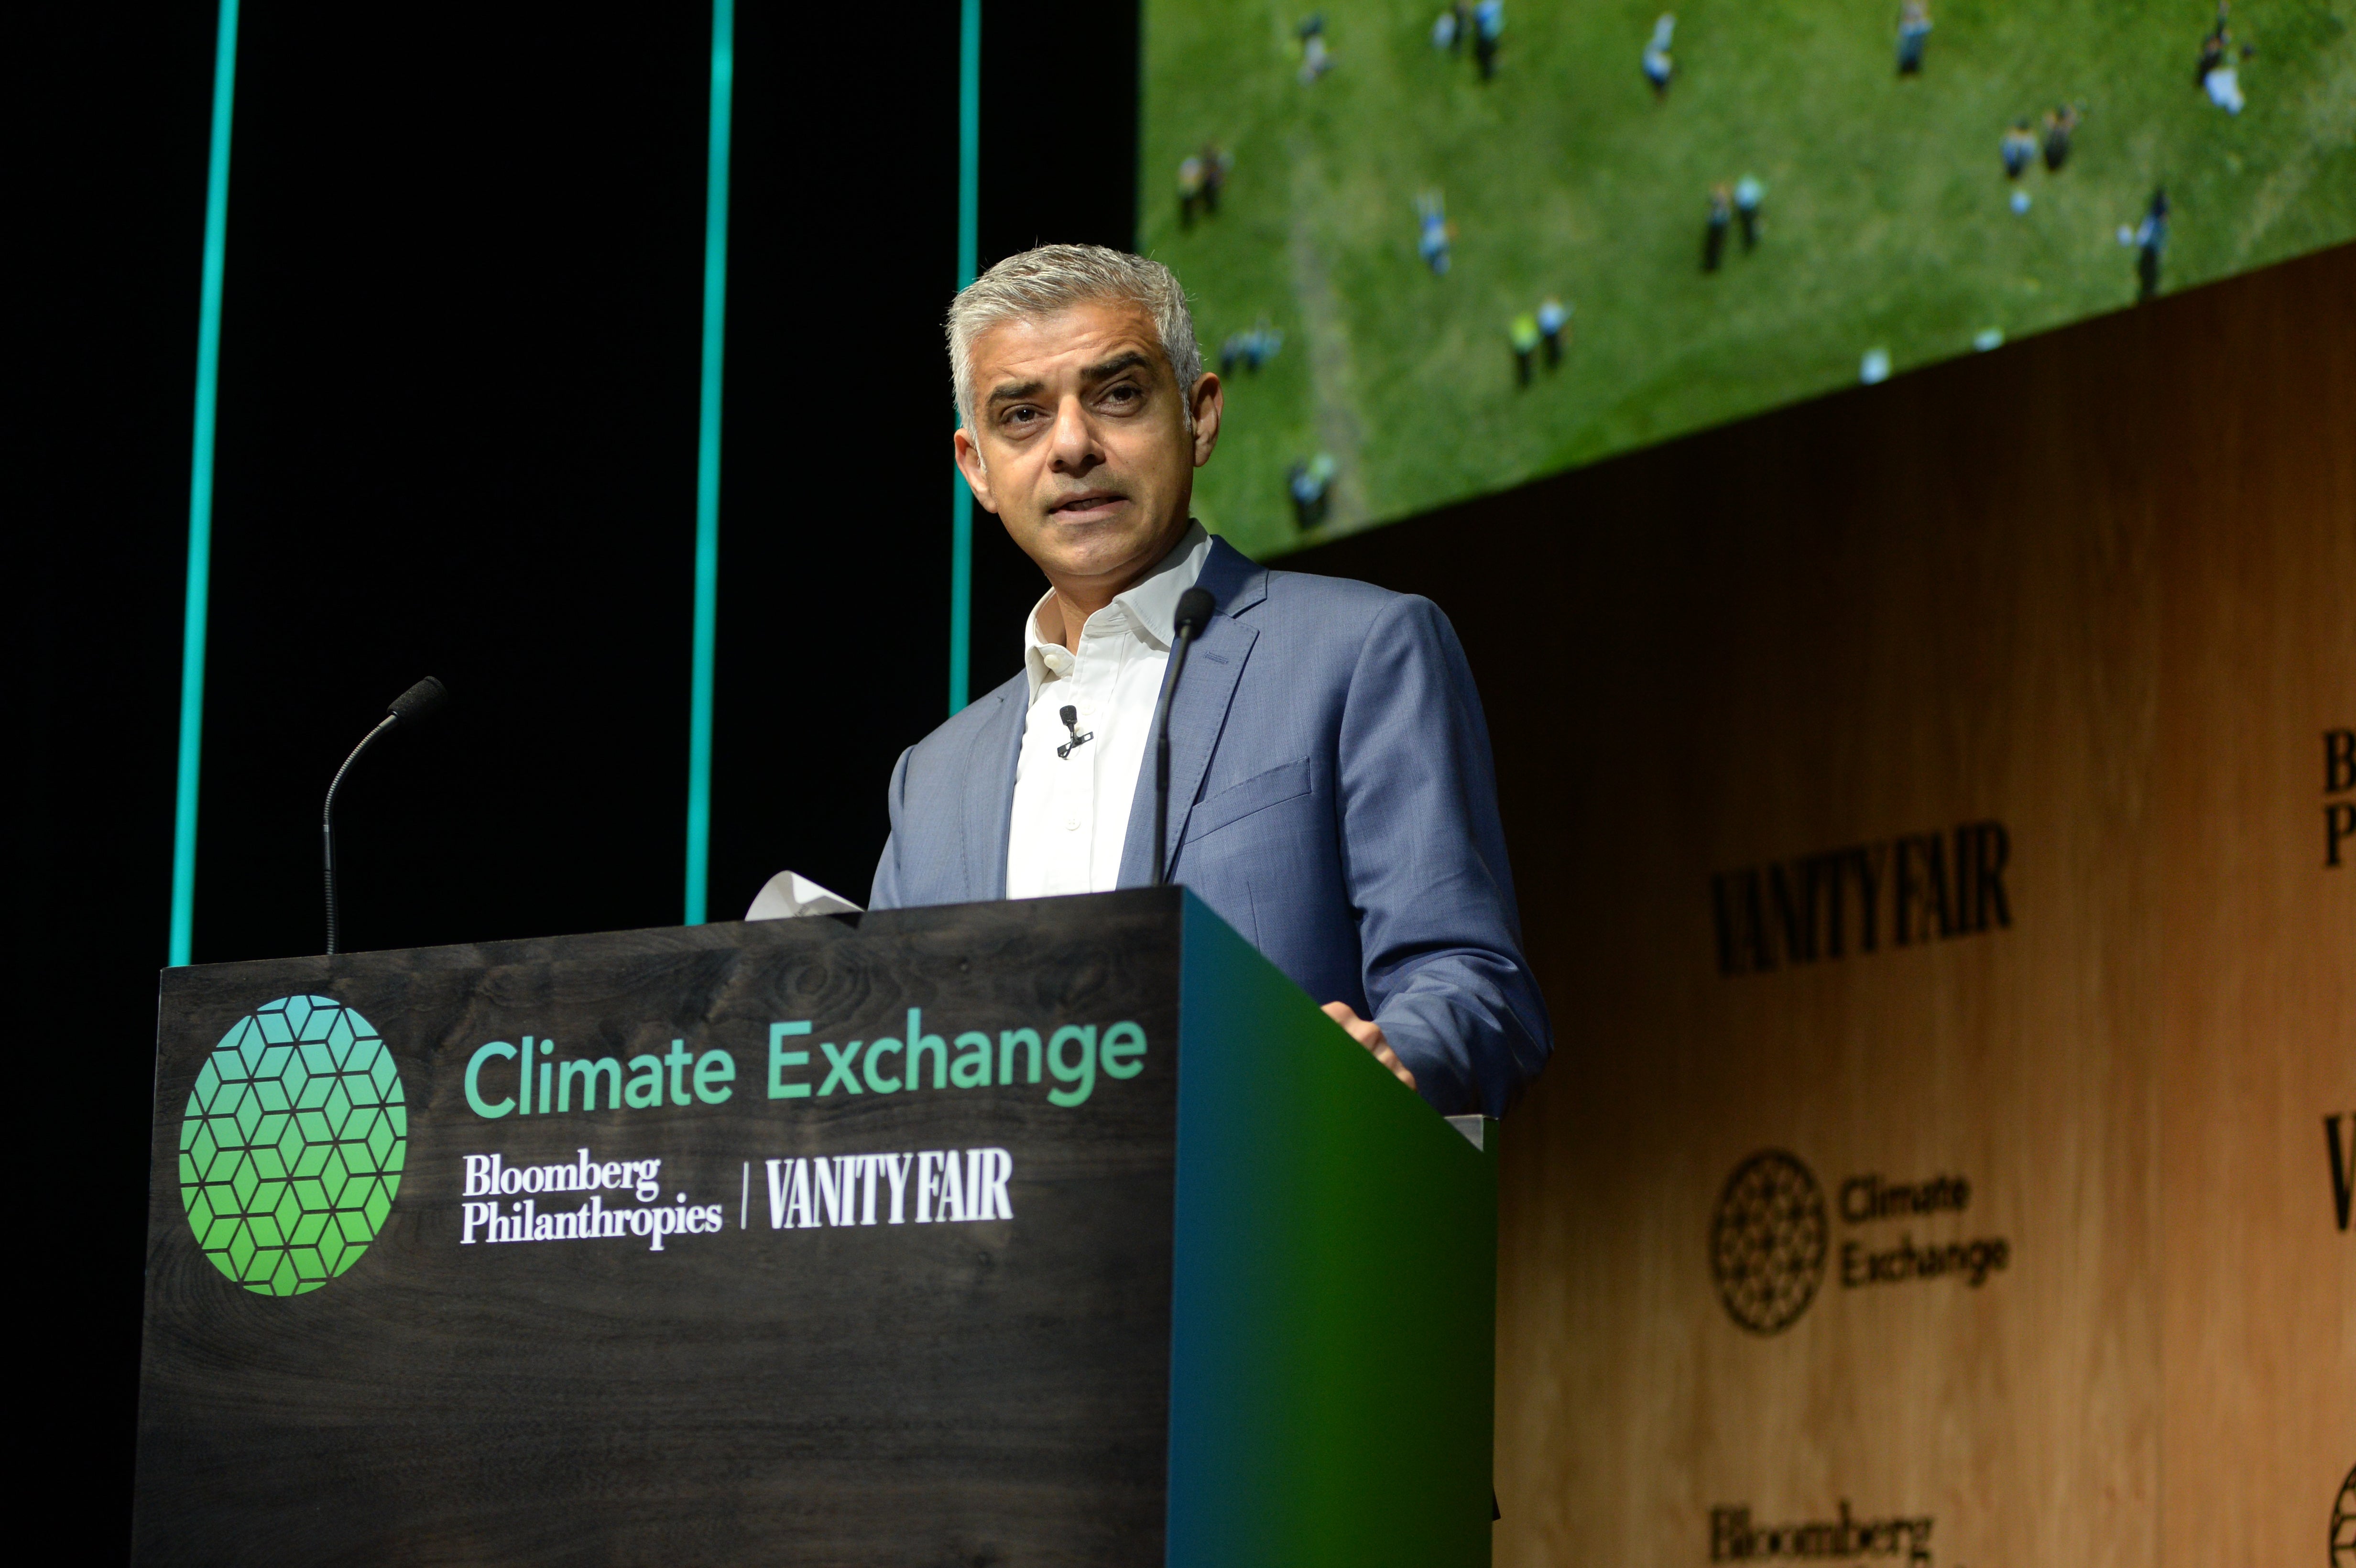 Sadiq Khan, mayor of London, during the climate change conference held at Bloomberg, London in December 2018